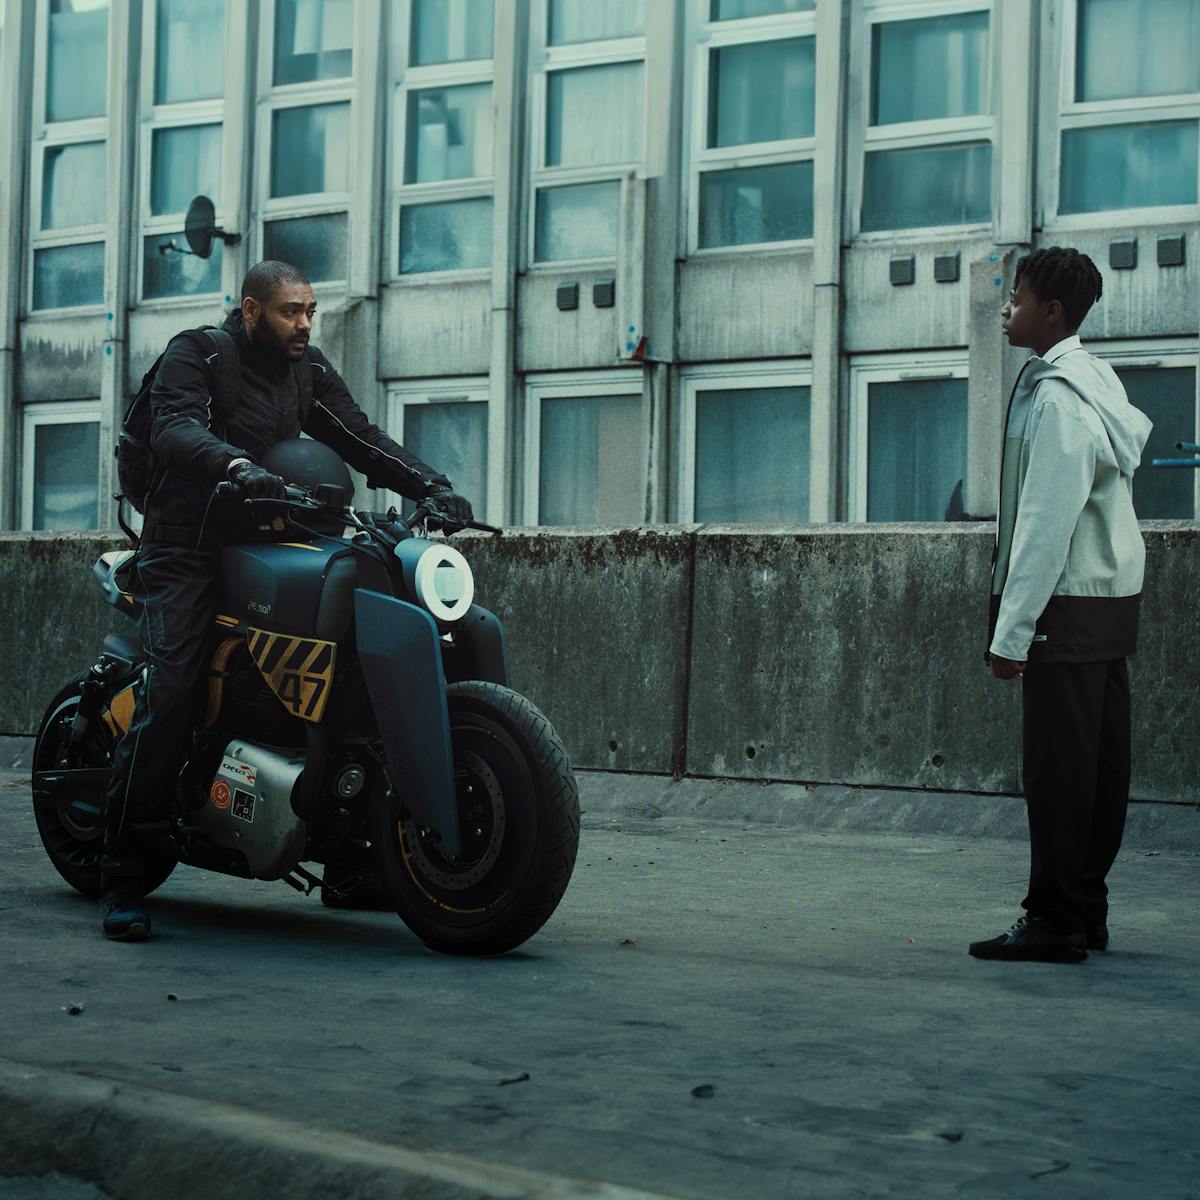 Izi (Kane Robinson) and Benji (Jedaiah Bannerman) meet on a concrete bridge. Izi is on a motorcycle. Behind them are weathered apartment buildings. 